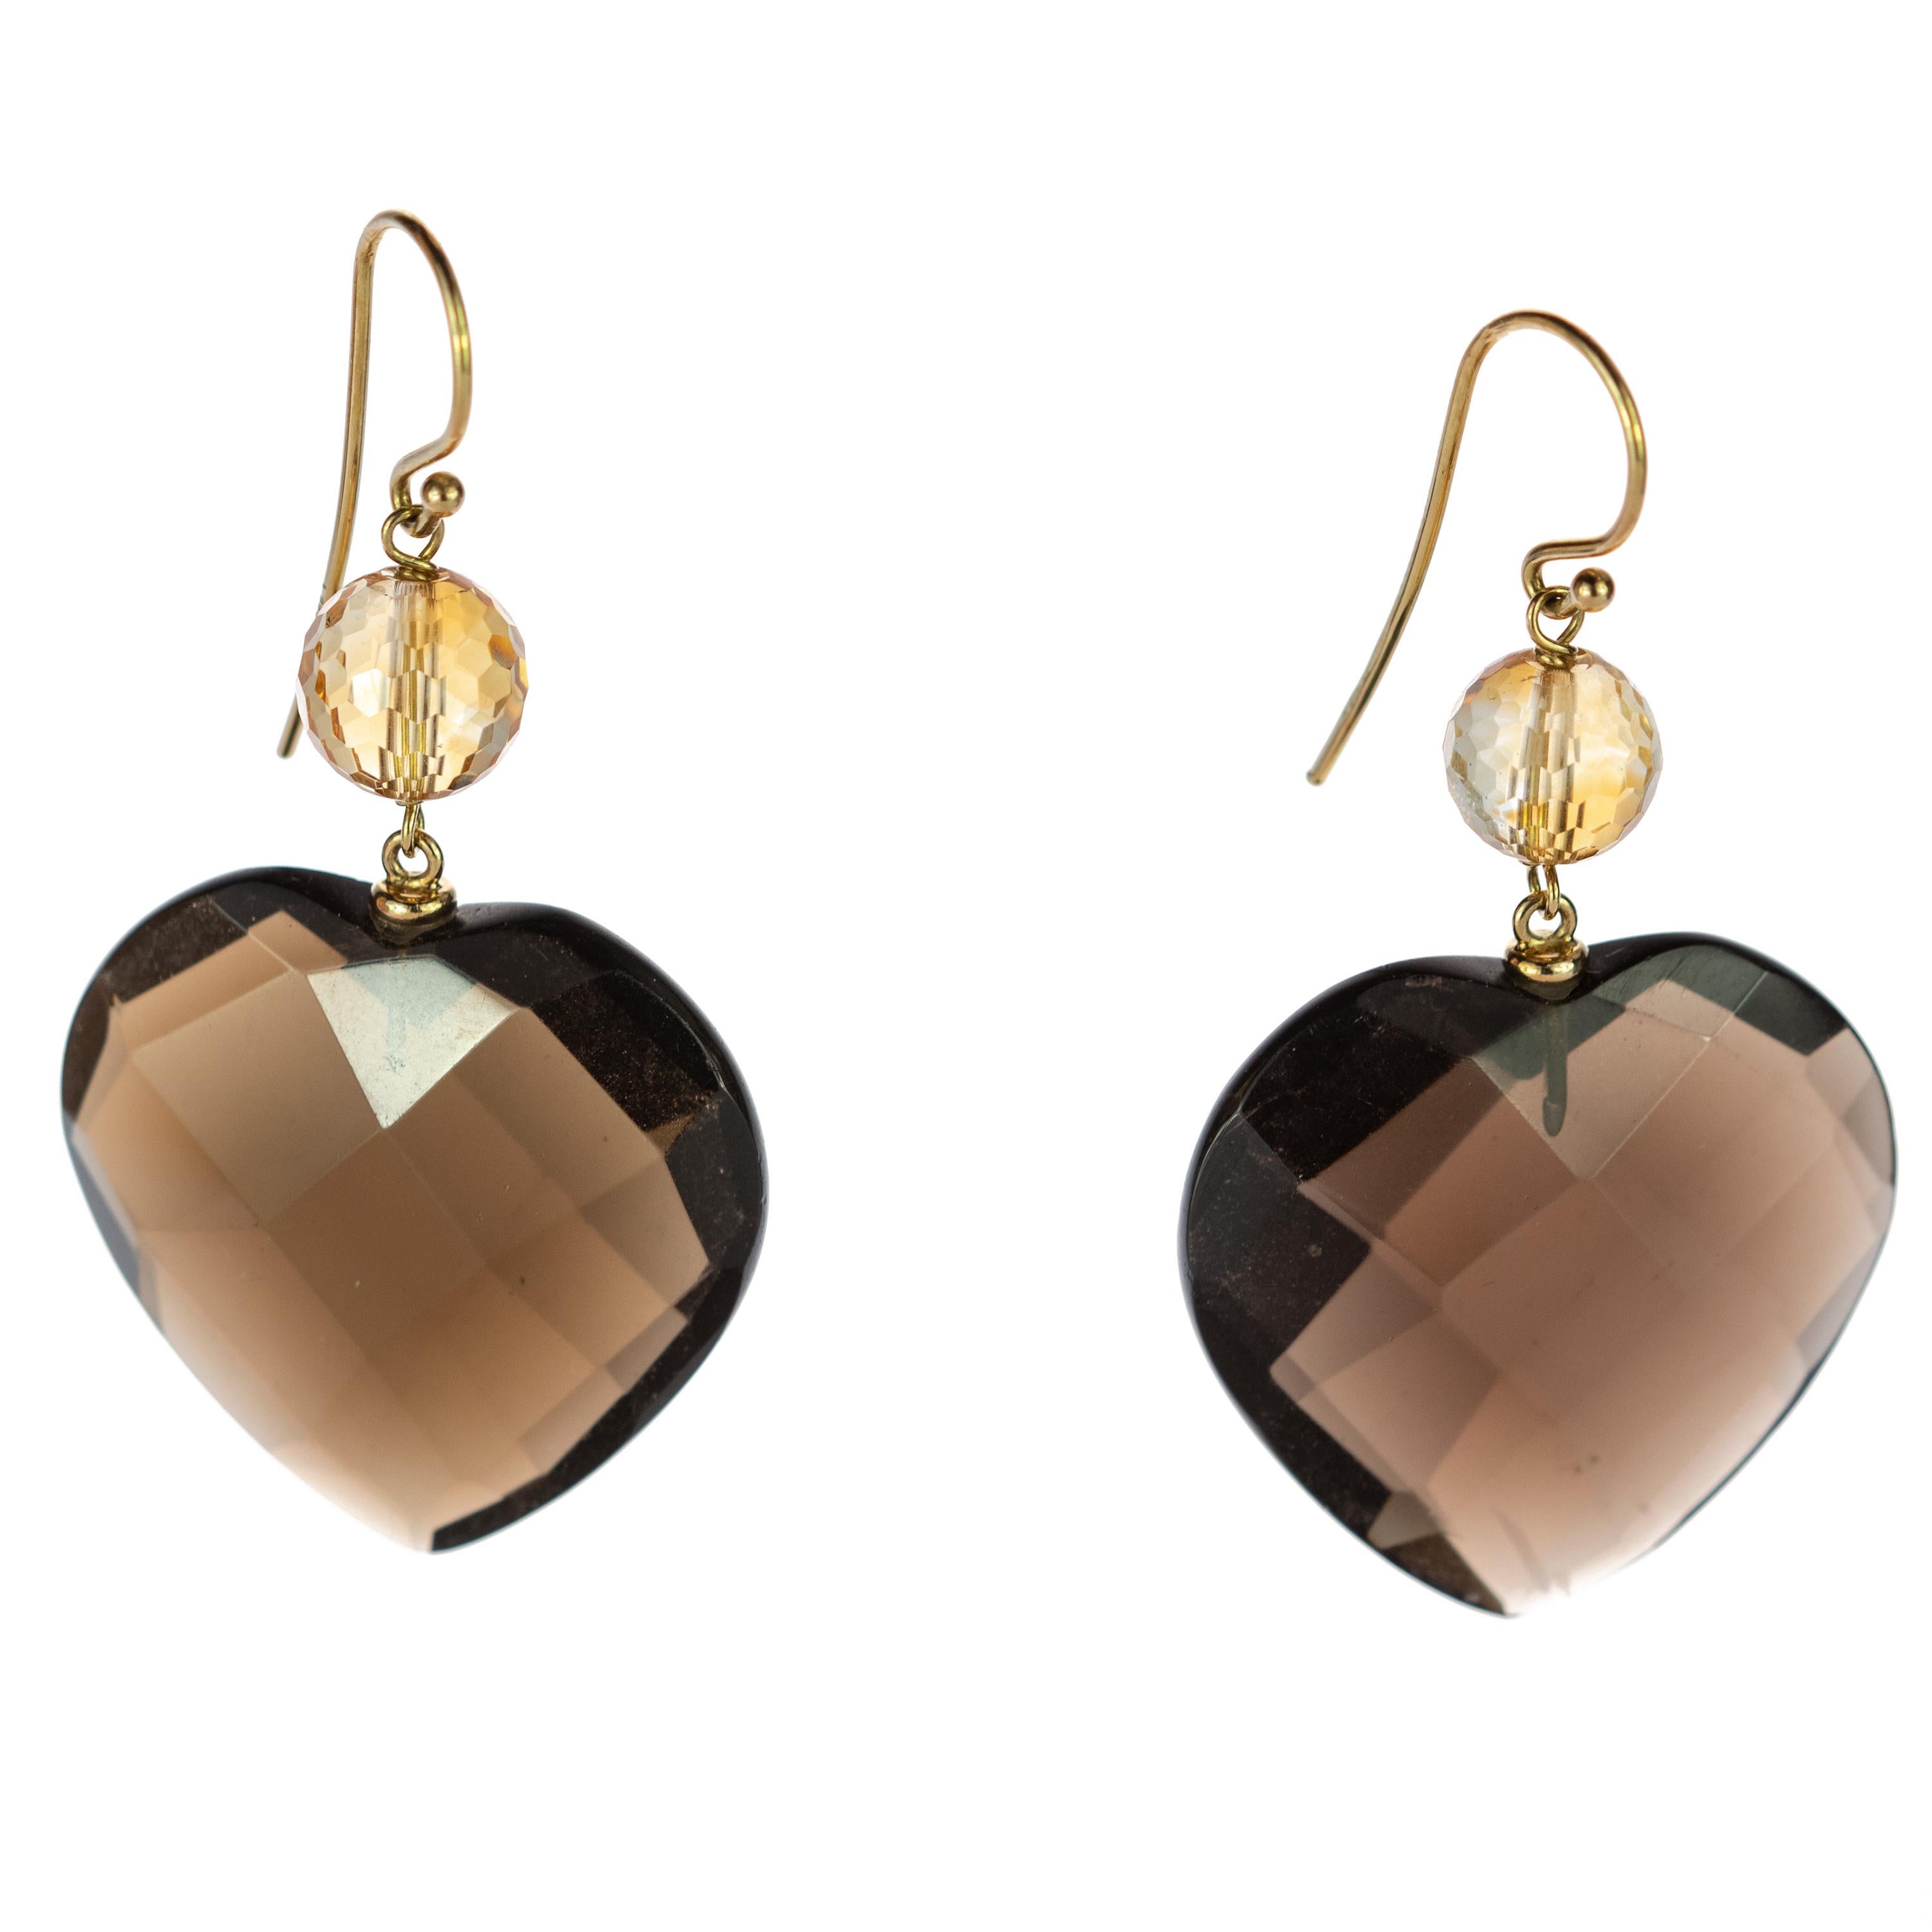 Take love with you everywhere! These breathtaking earrings have a sweet design and the most precious stones.  The quartz is considered a “master healer”, amplifying energy by absorbing, storing and regulating it. These stud dangle earrings with 18